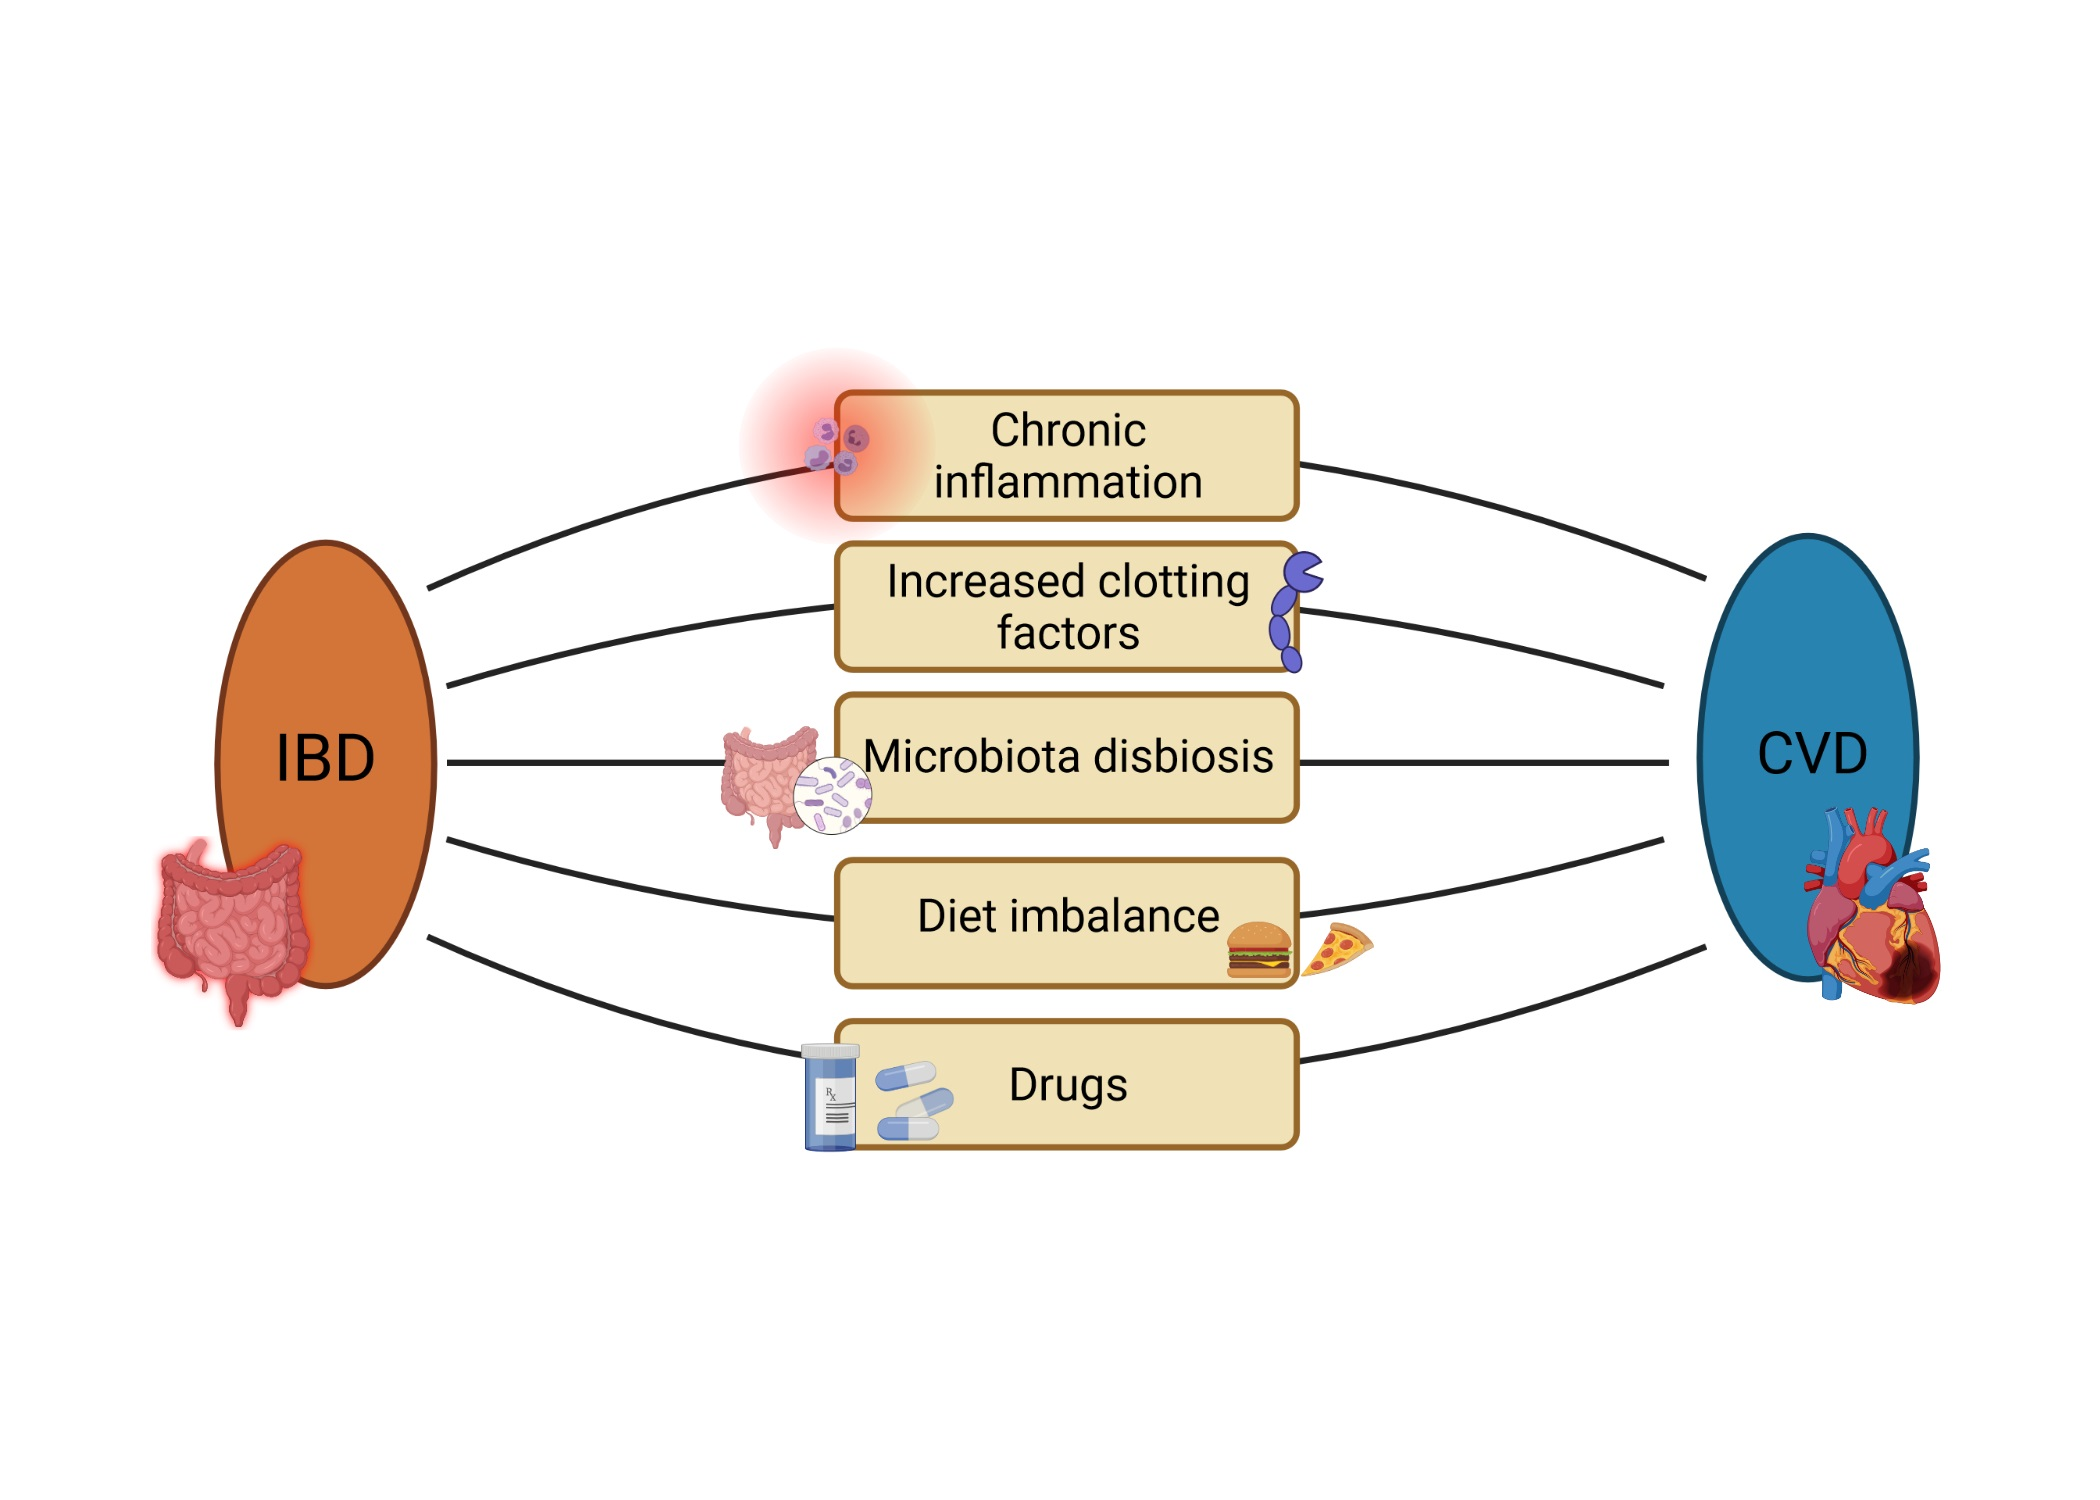 Nutrients | Free Full-Text | What Links an Increased Cardiovascular Risk  and Inflammatory Bowel Disease? A Narrative Review | HTML